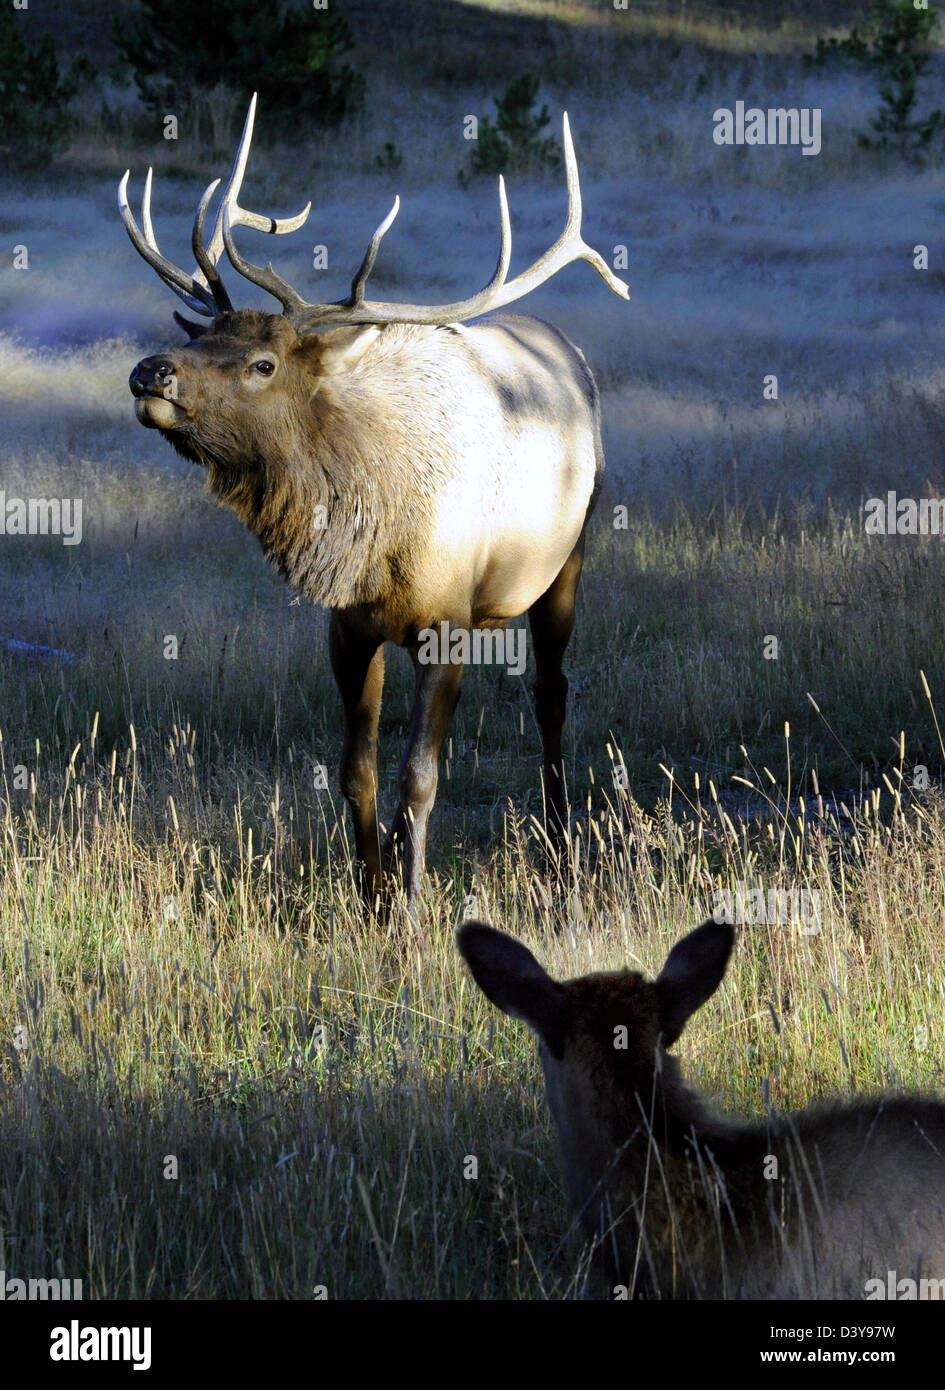 Male Elk engage in ritualized mating behavior during rut antler sparing, bugling vocalizations with female in foreground,antler, Stock Photo